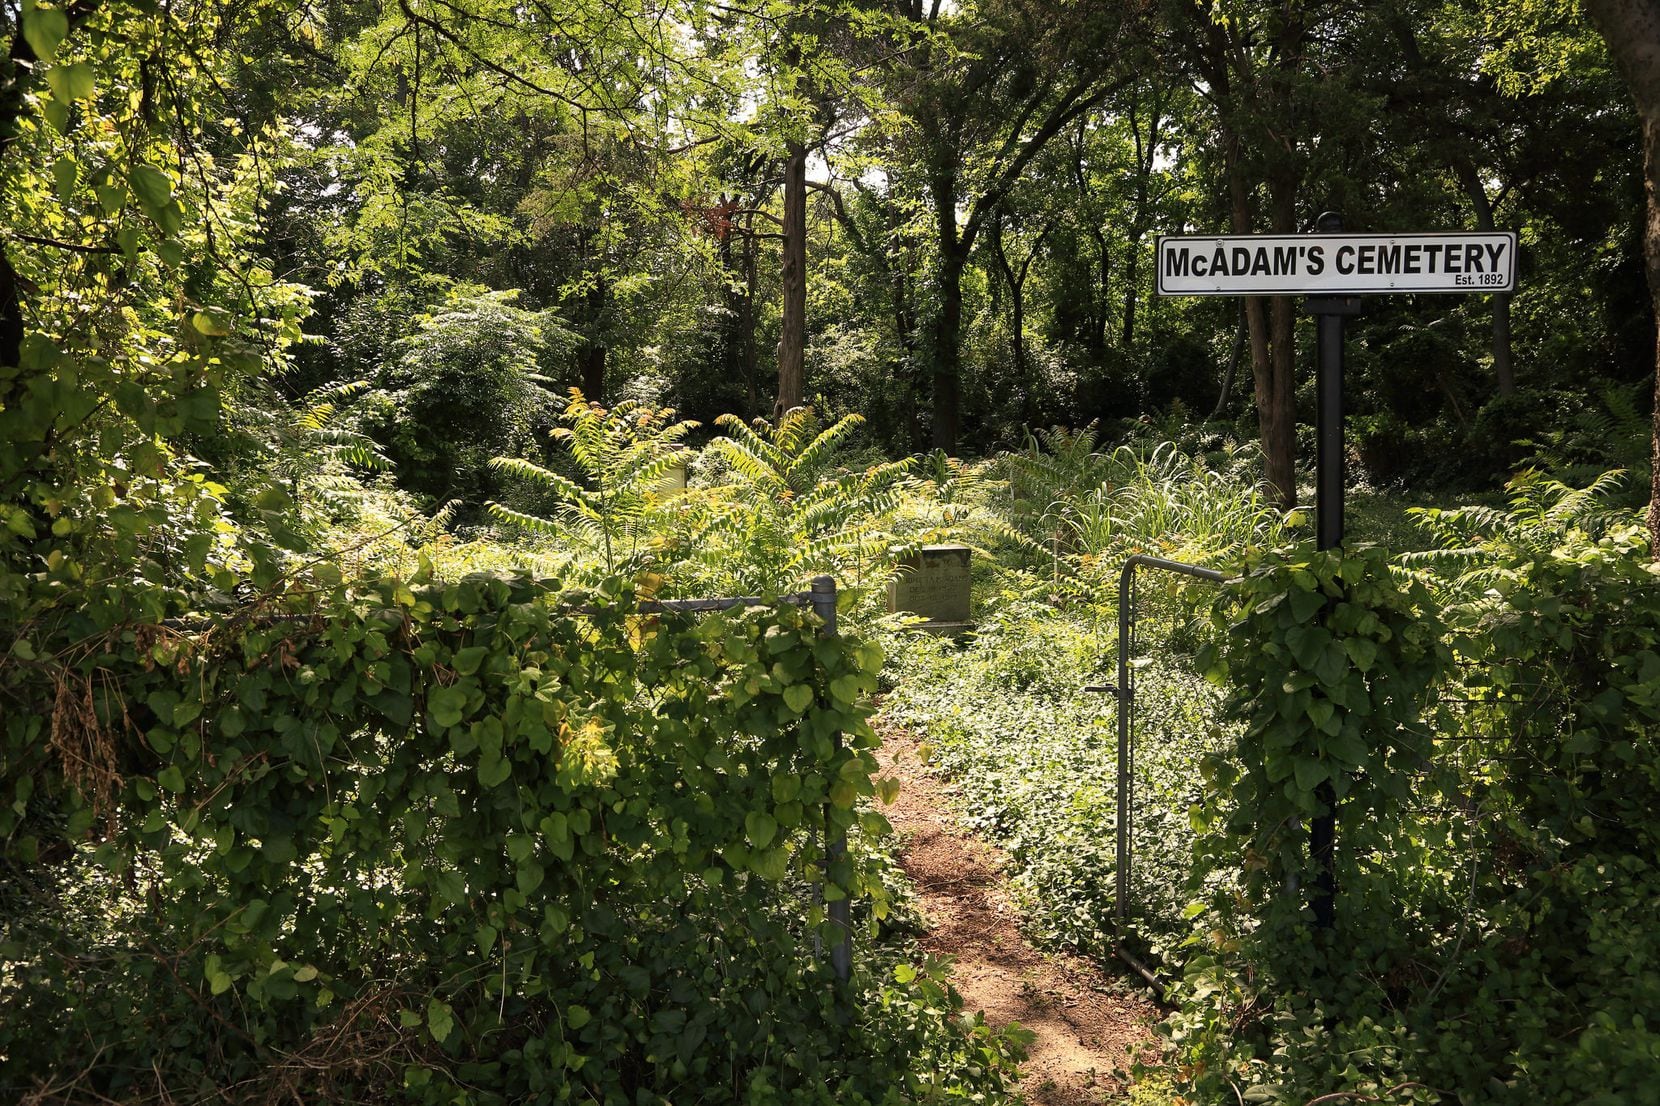  Speaking of weeds, McAdam's Cemetery in Oak Cliff is now buried in foliage following May...